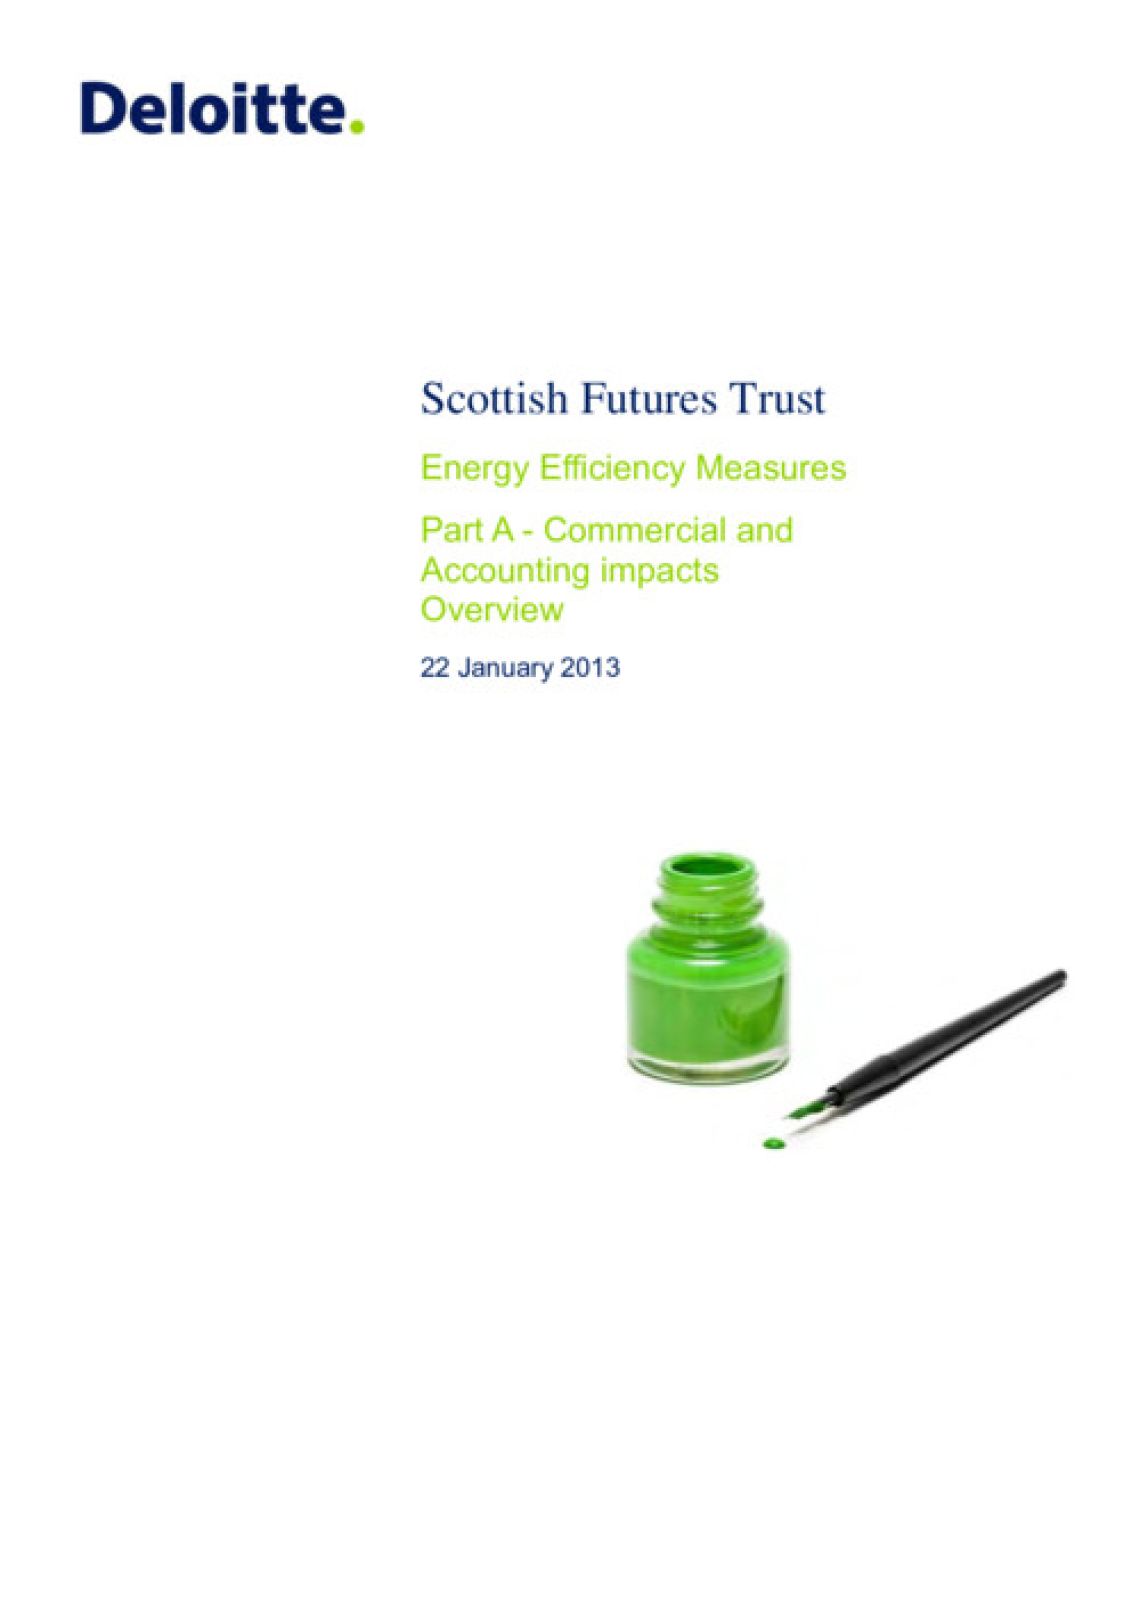 SFT Energy Efficiency Measures - Commercial and Accounting Overview - Part A cover